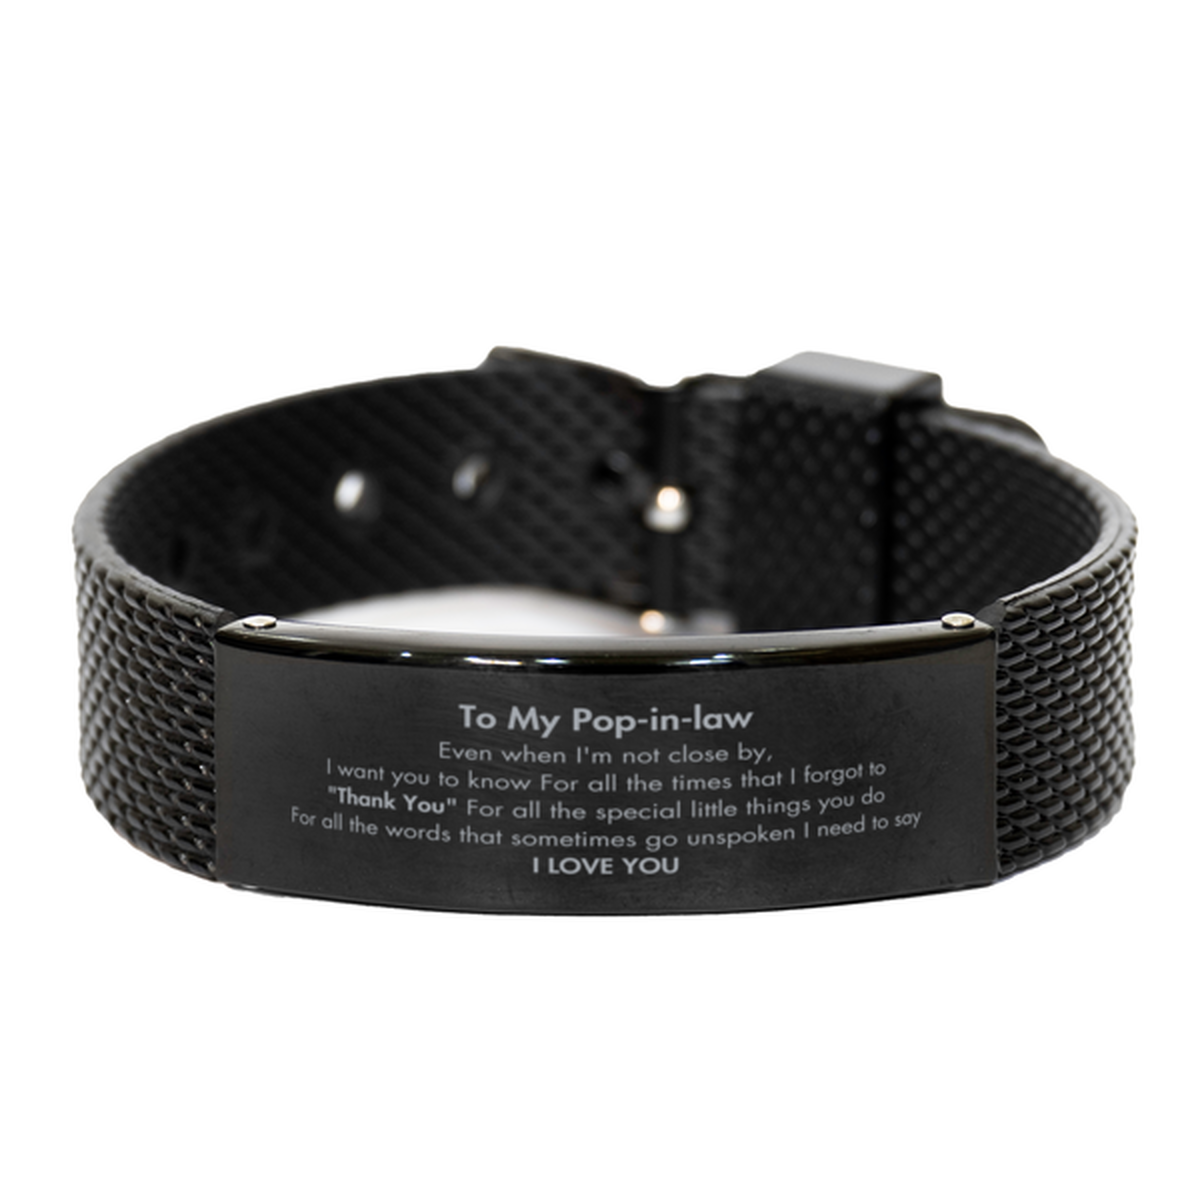 Thank You Gifts for Pop-in-law, Keepsake Black Shark Mesh Bracelet Gifts for Pop-in-law Birthday Mother's day Father's Day Pop-in-law For all the words That sometimes go unspoken I need to say I LOVE YOU